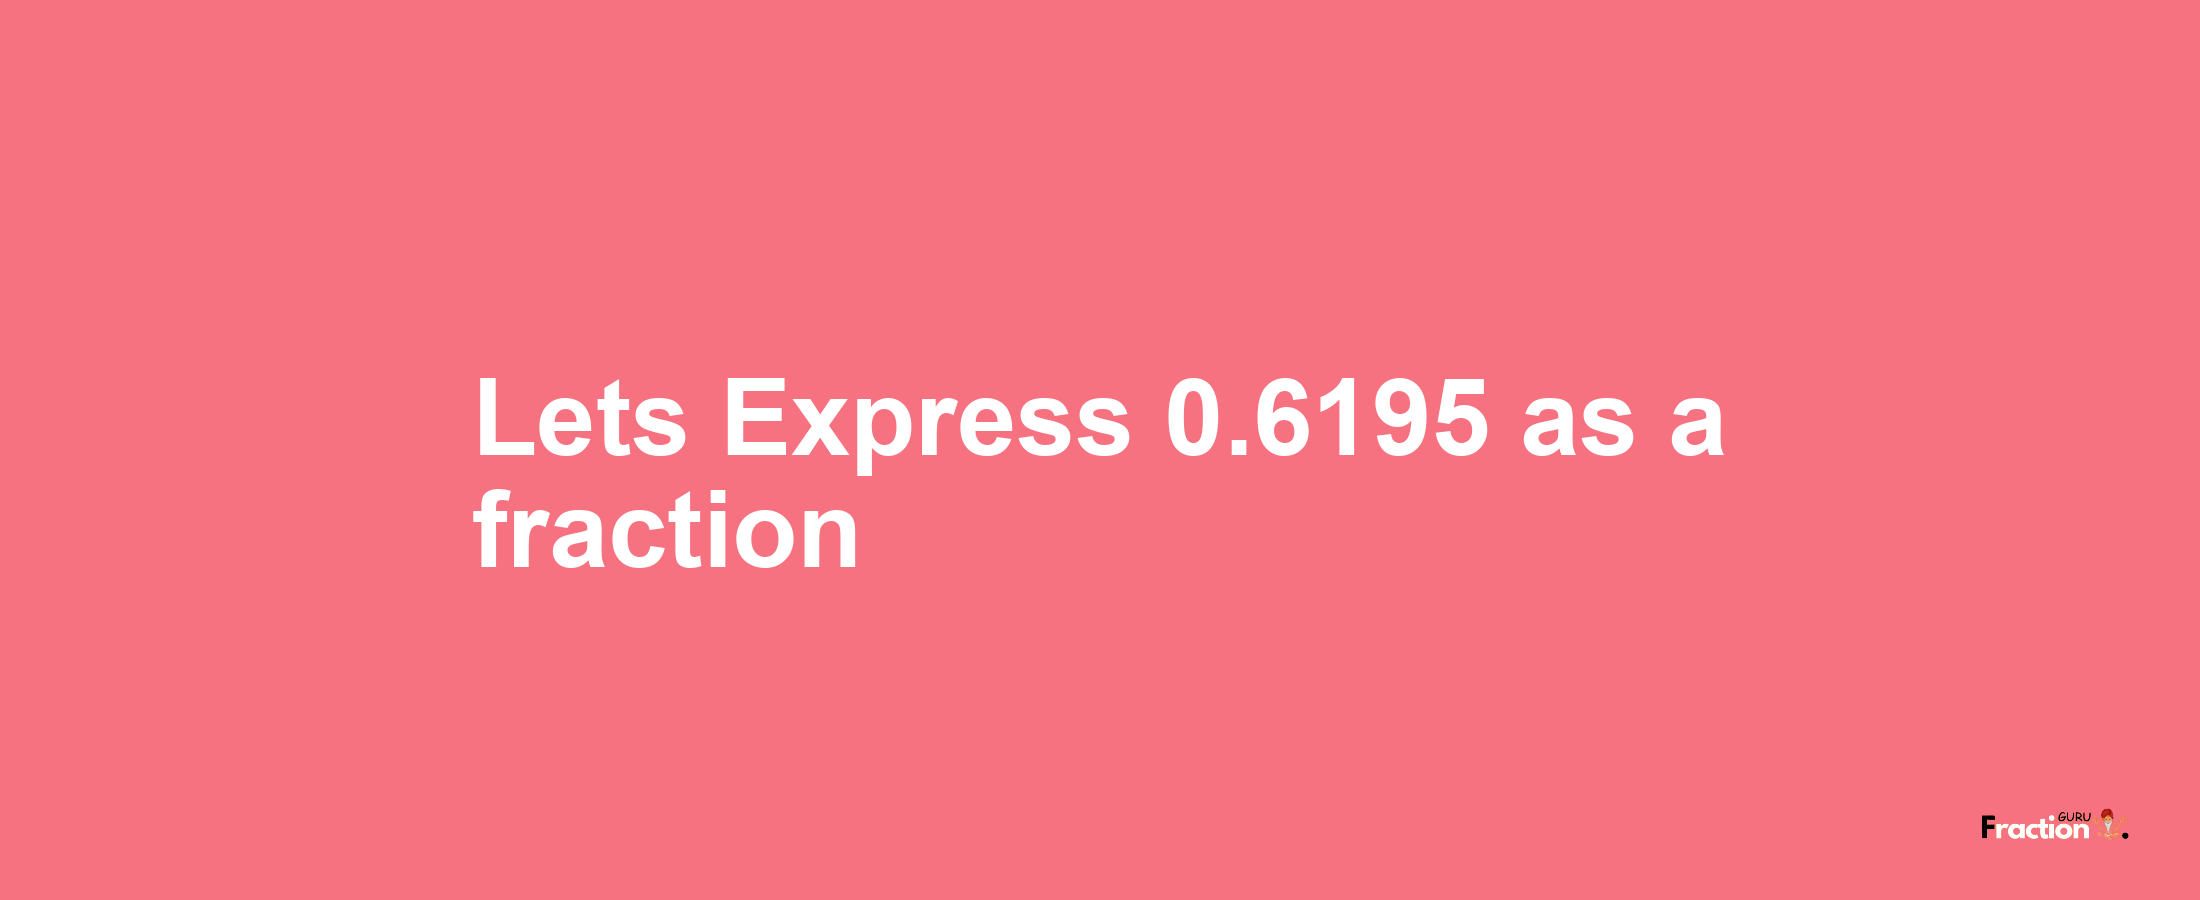 Lets Express 0.6195 as afraction